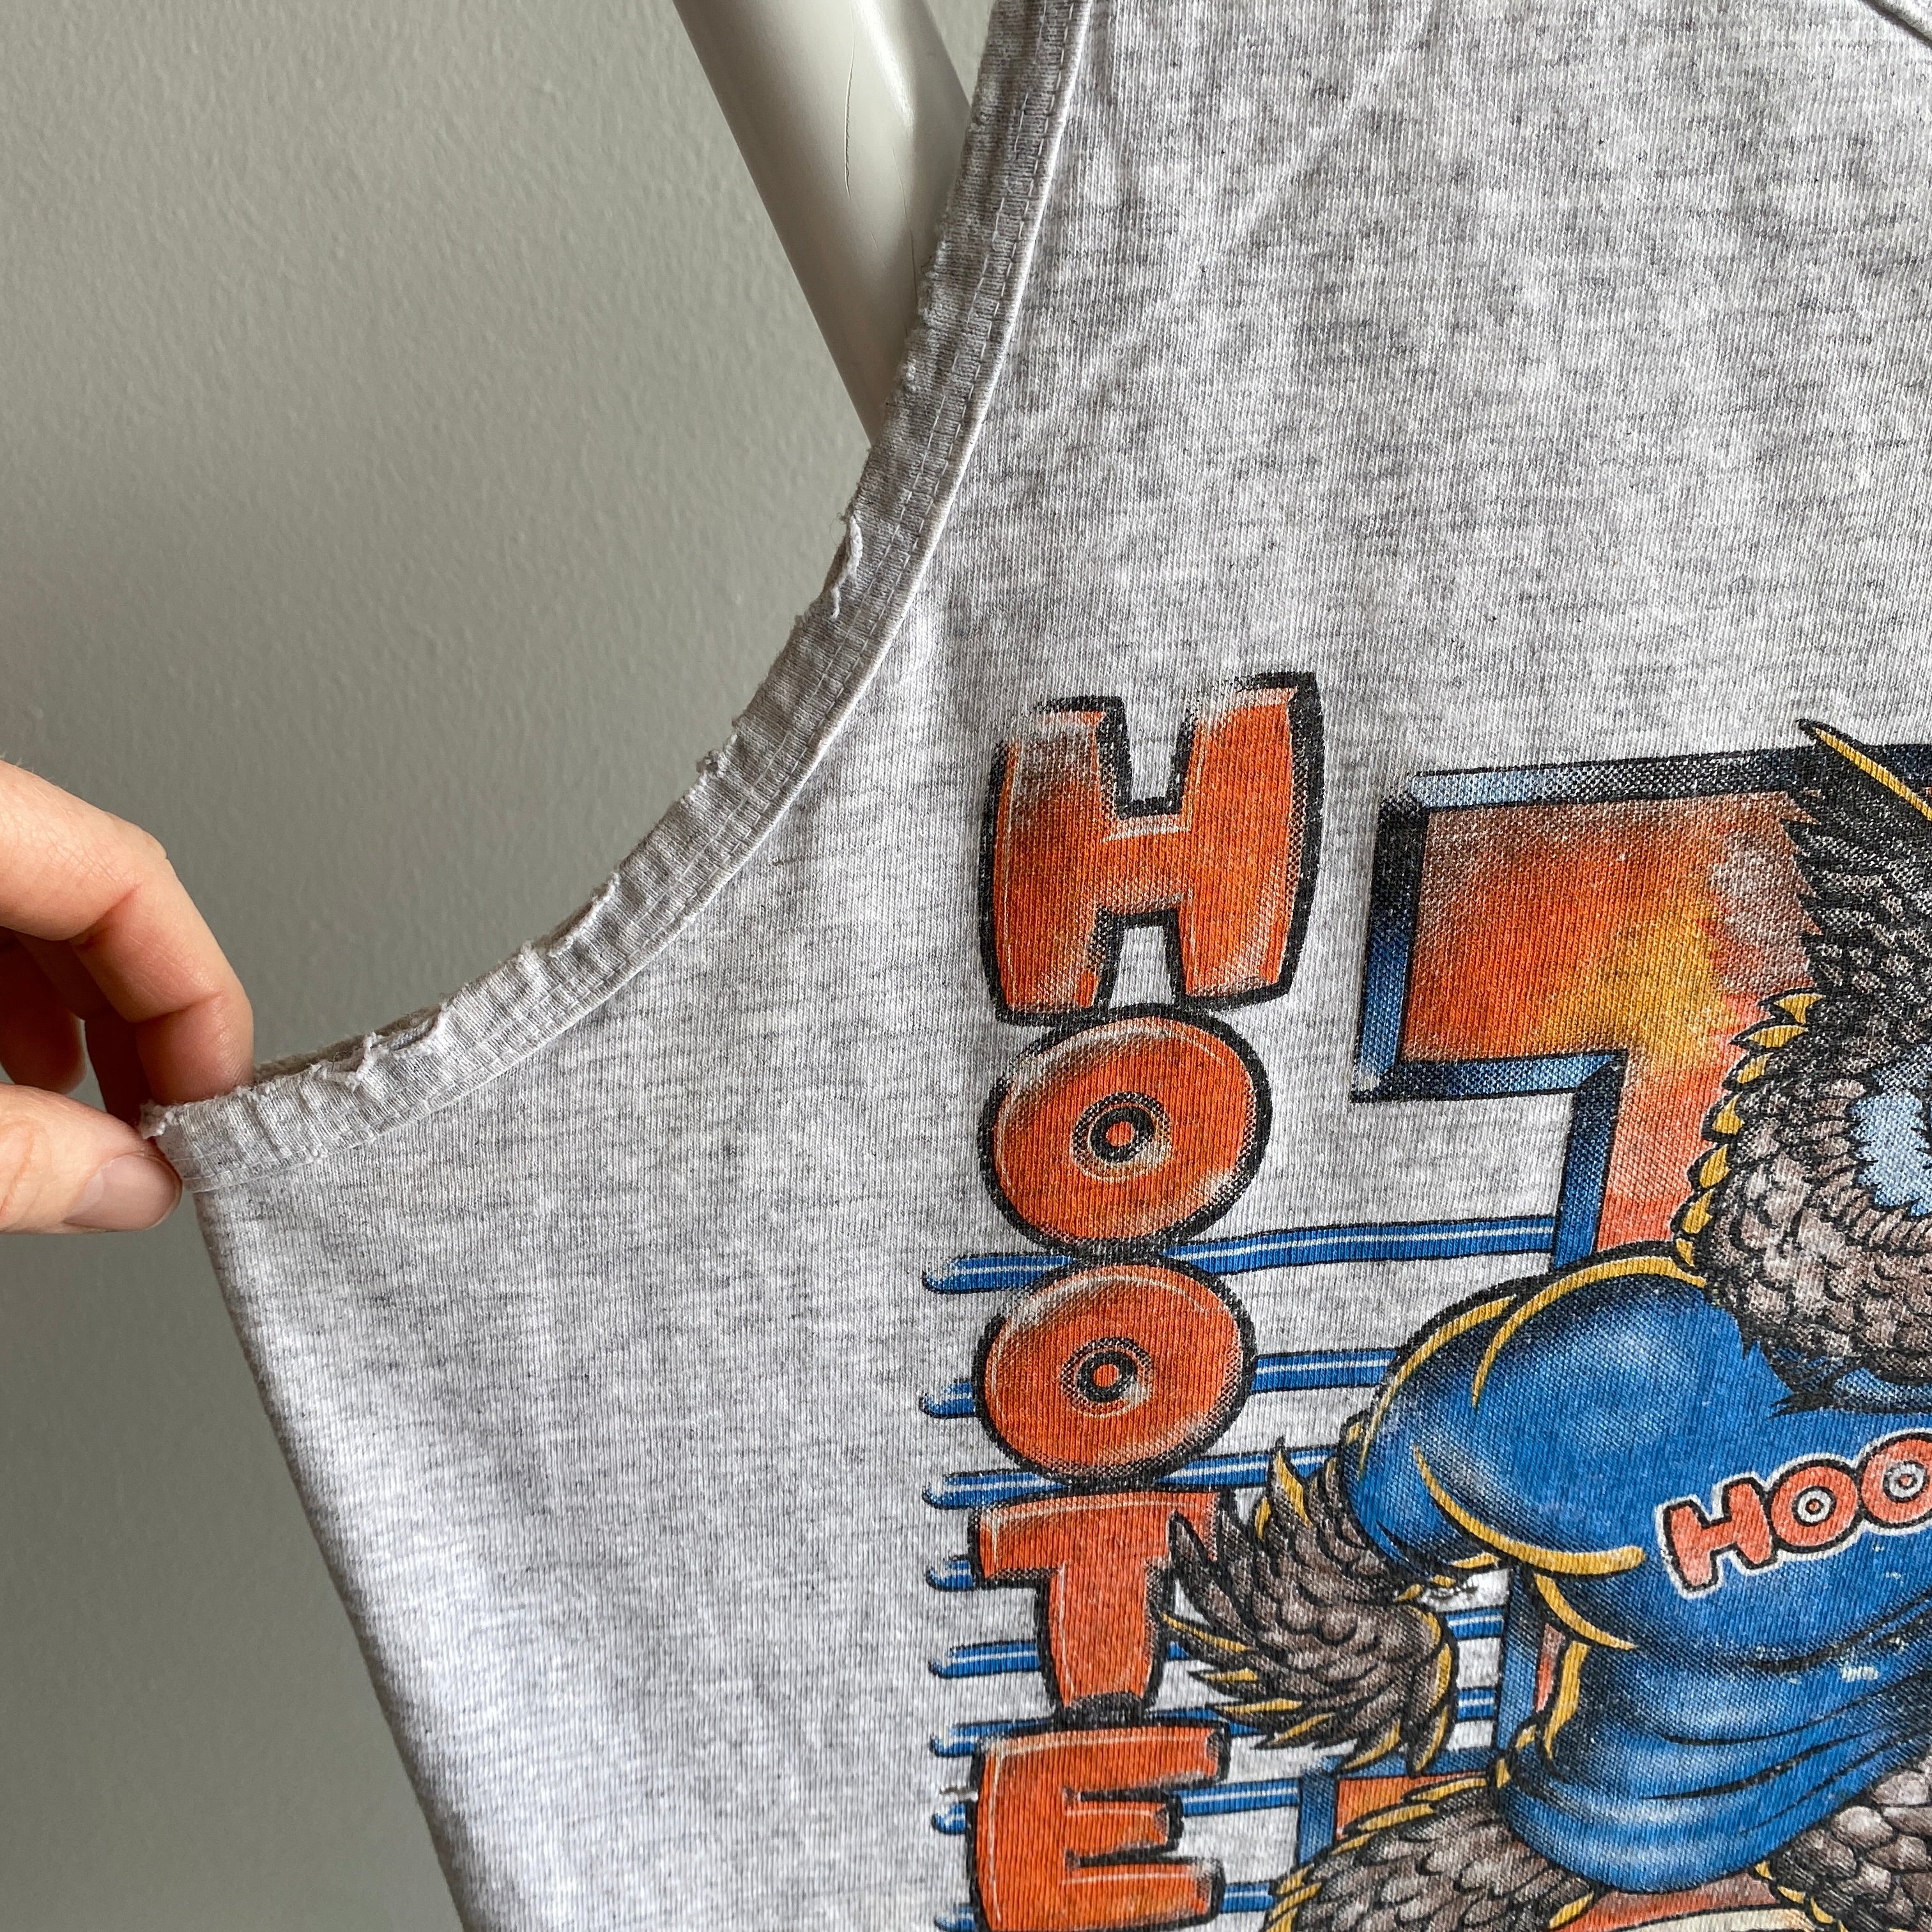 1980s/90s Hooters Perfectly (Very) Beat Up Tank Top